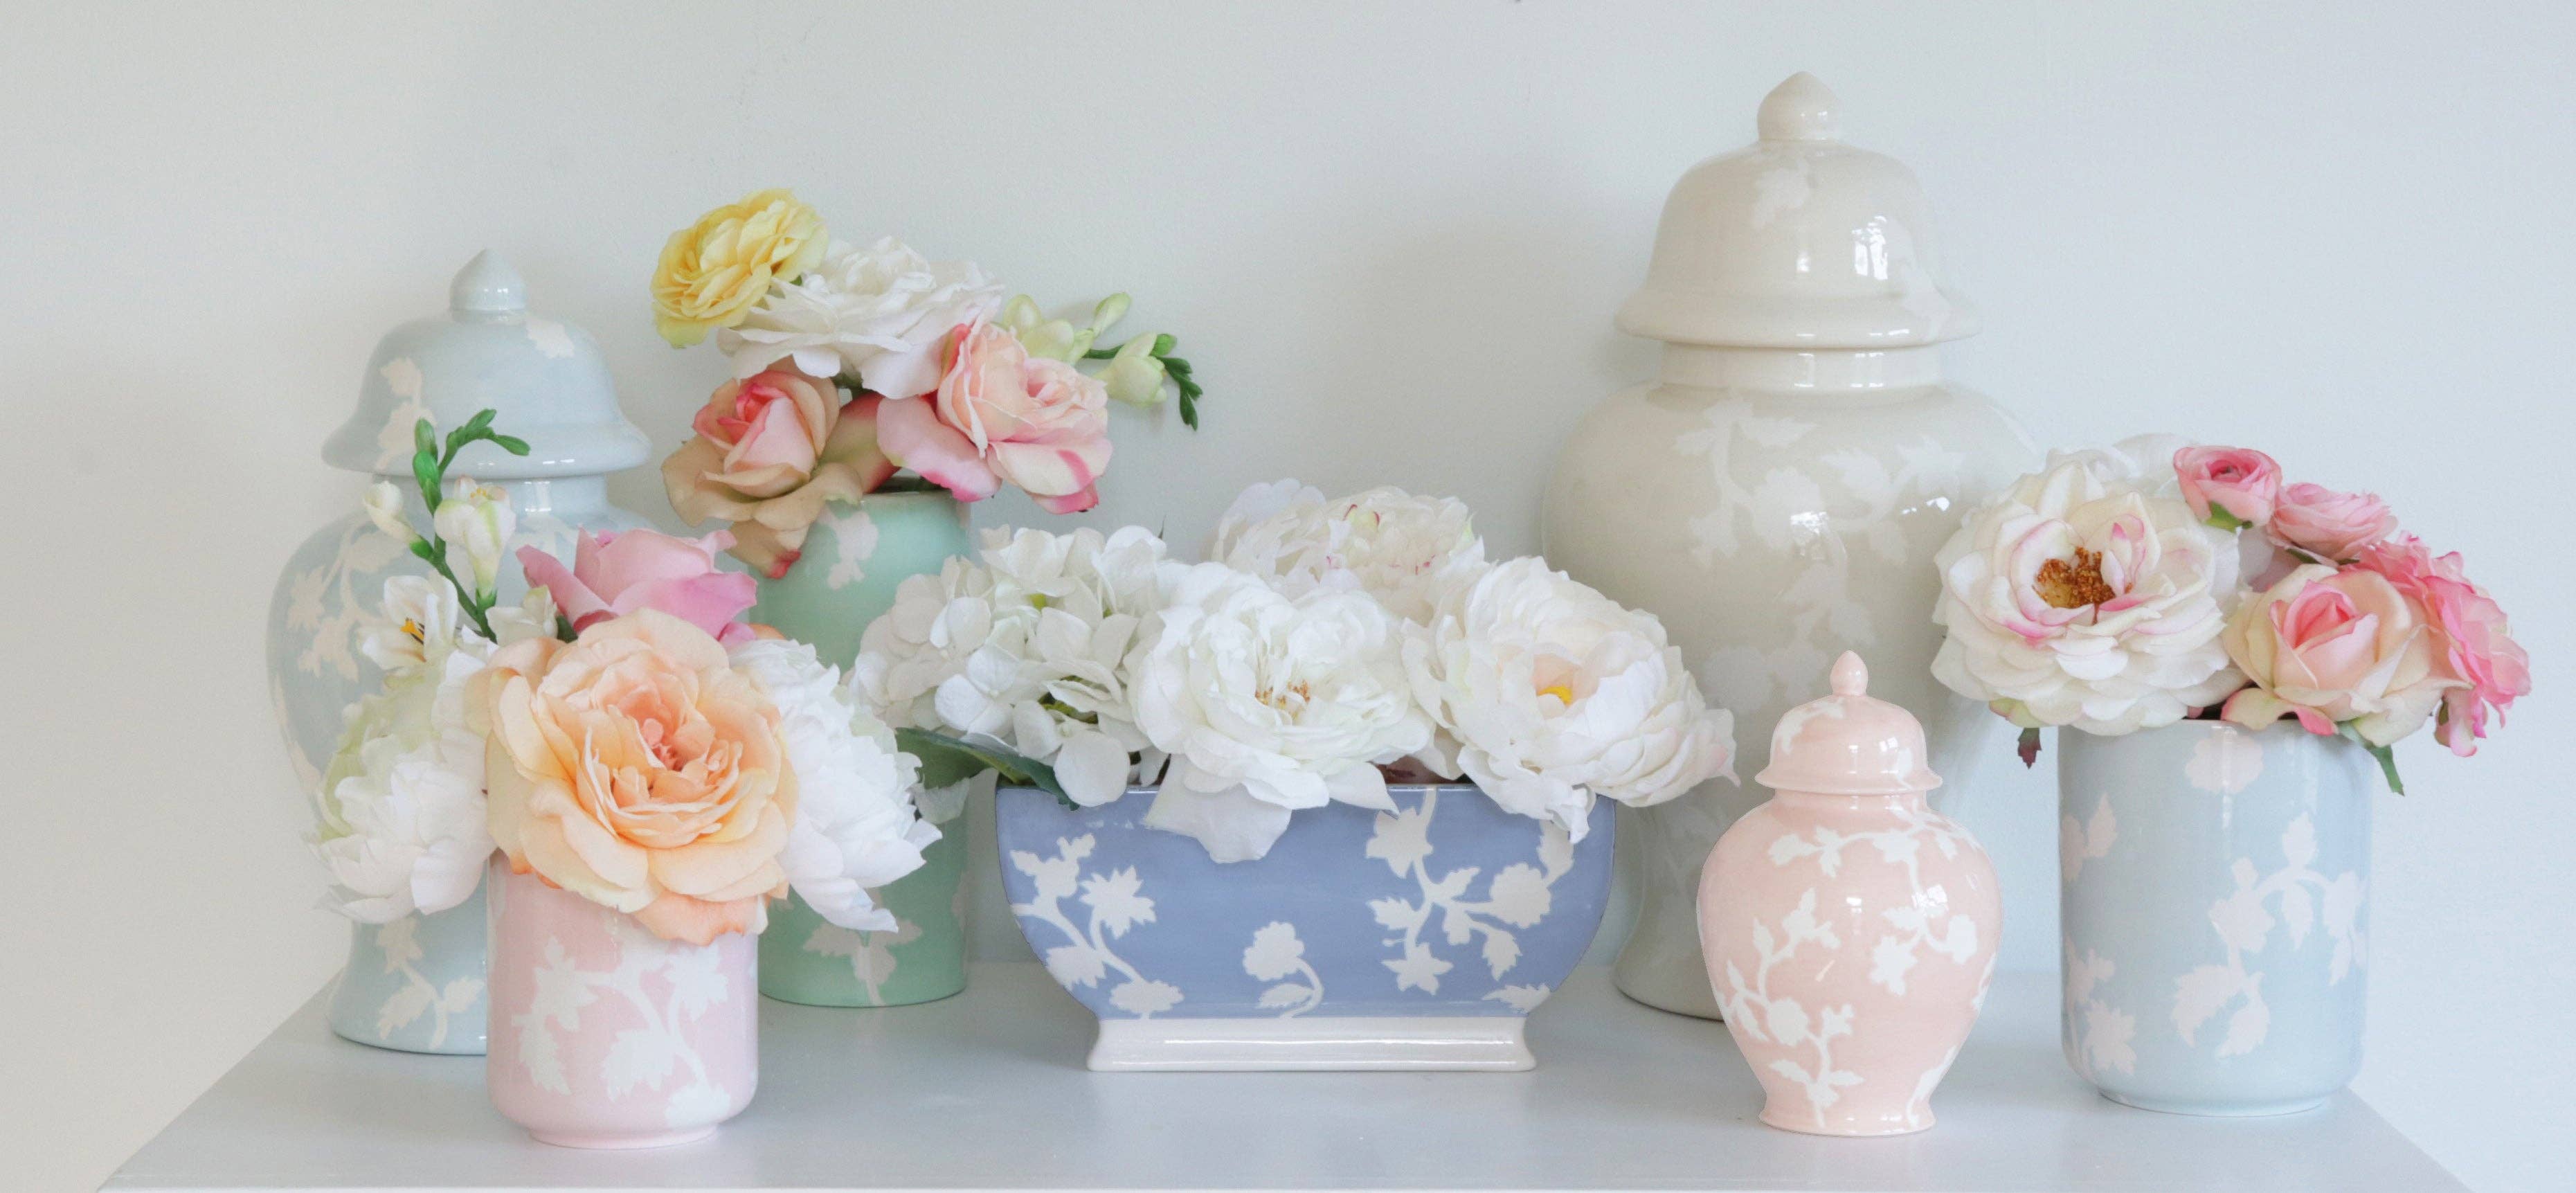 Lo Home by Lauren Haskell Designs Chinoiserie Dreams Planter: Serenity Blue - Little Birdies